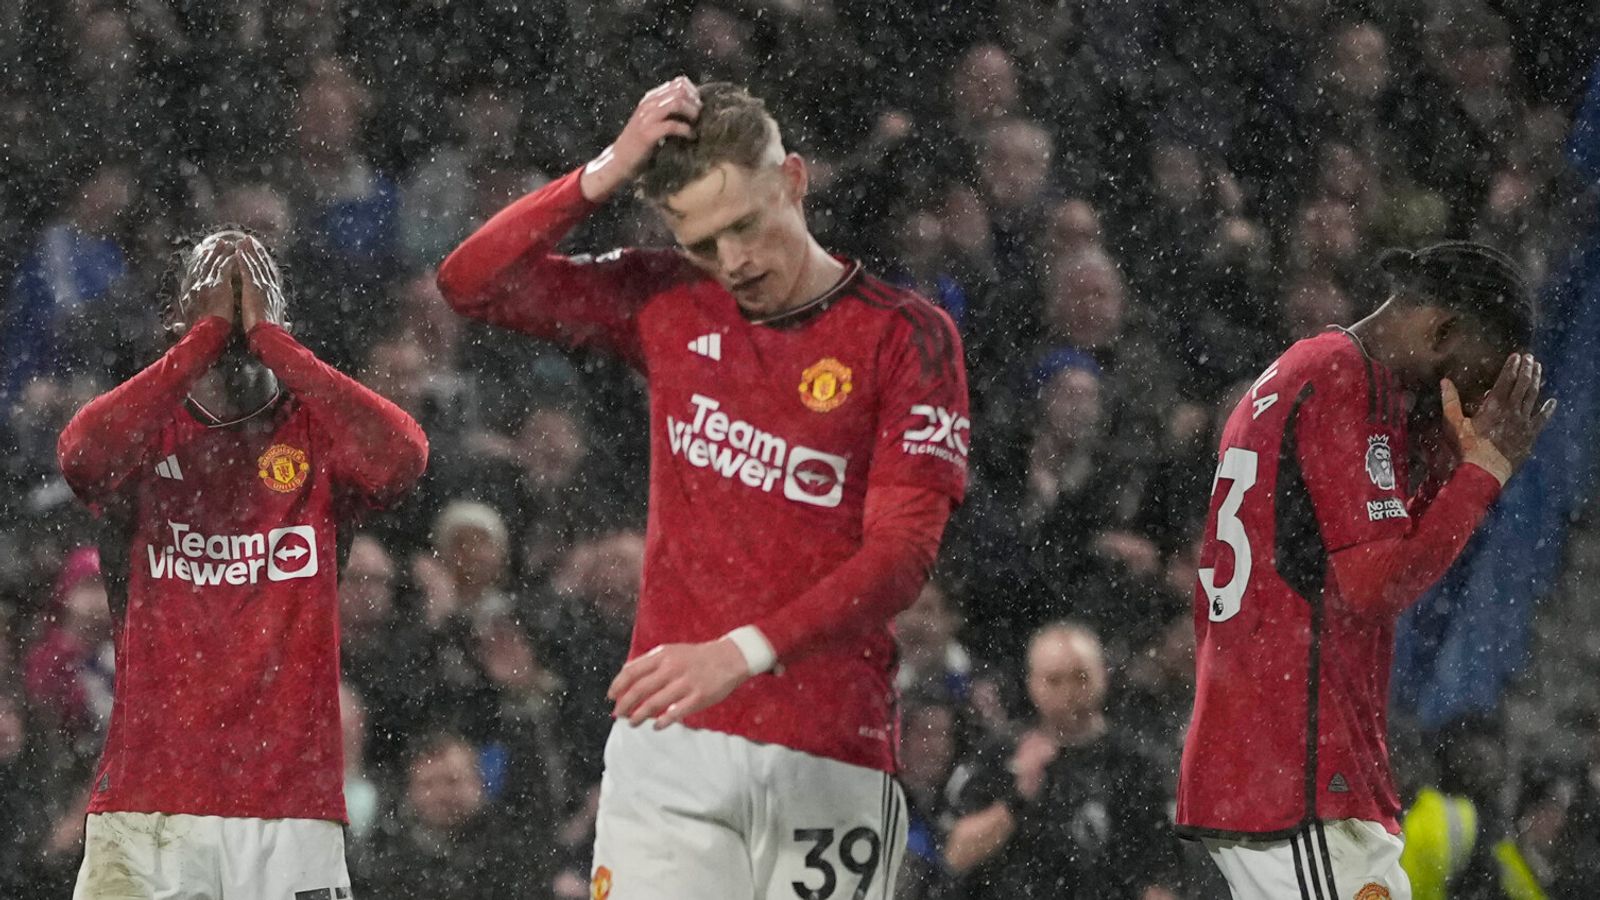 Erik ten Hag: Manchester United boss laments poor decision-making in dramatic 4-3 late defeat at Chelsea | Football News